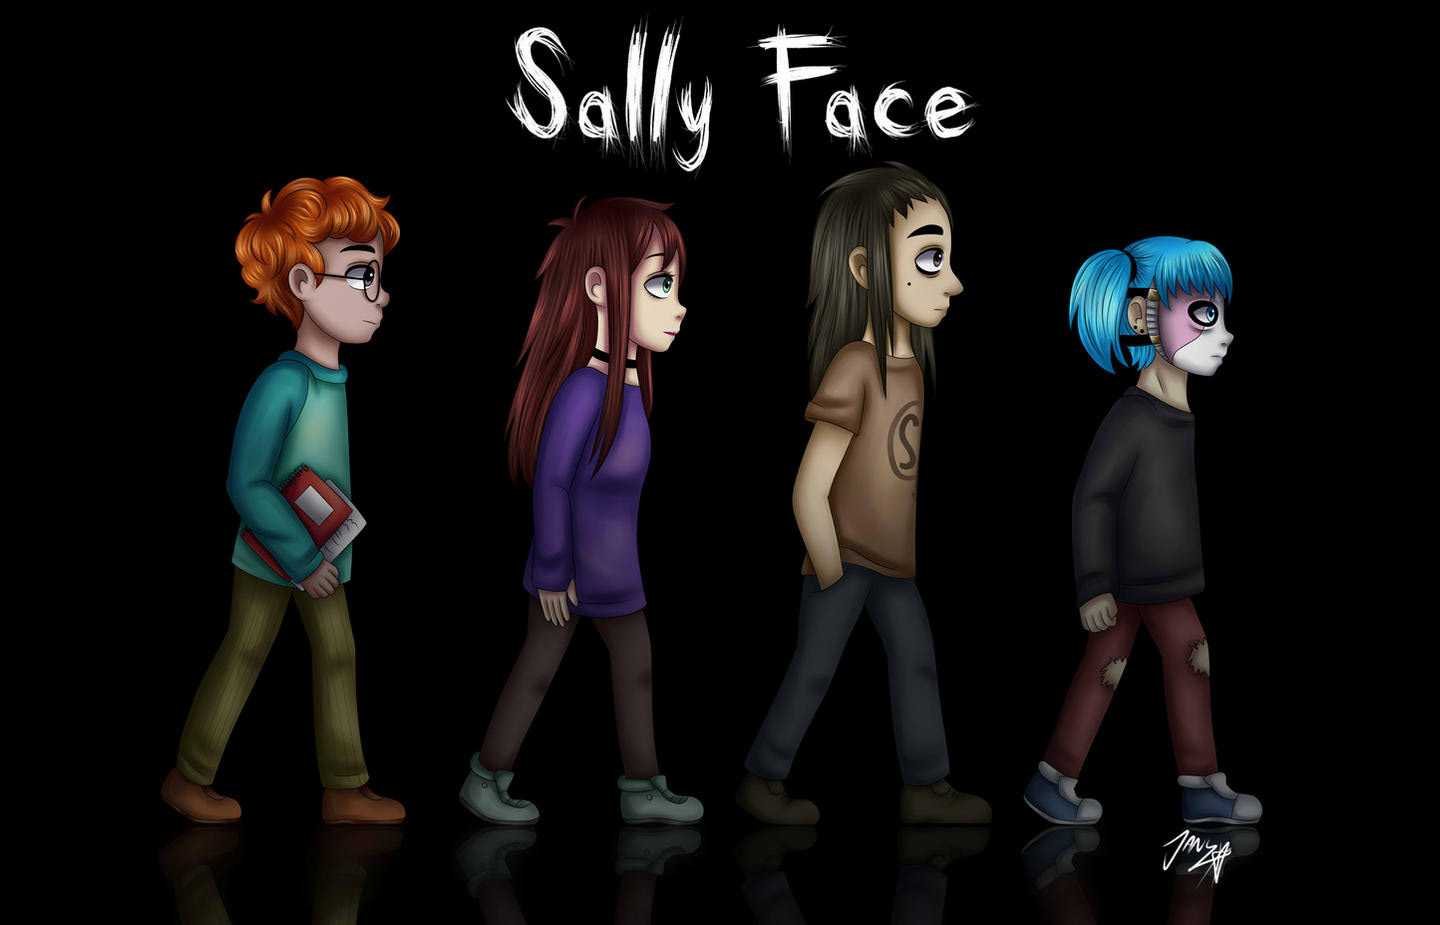 Sally Face Wallpapers - KoLPaPer - Awesome Free HD Wallpapers.